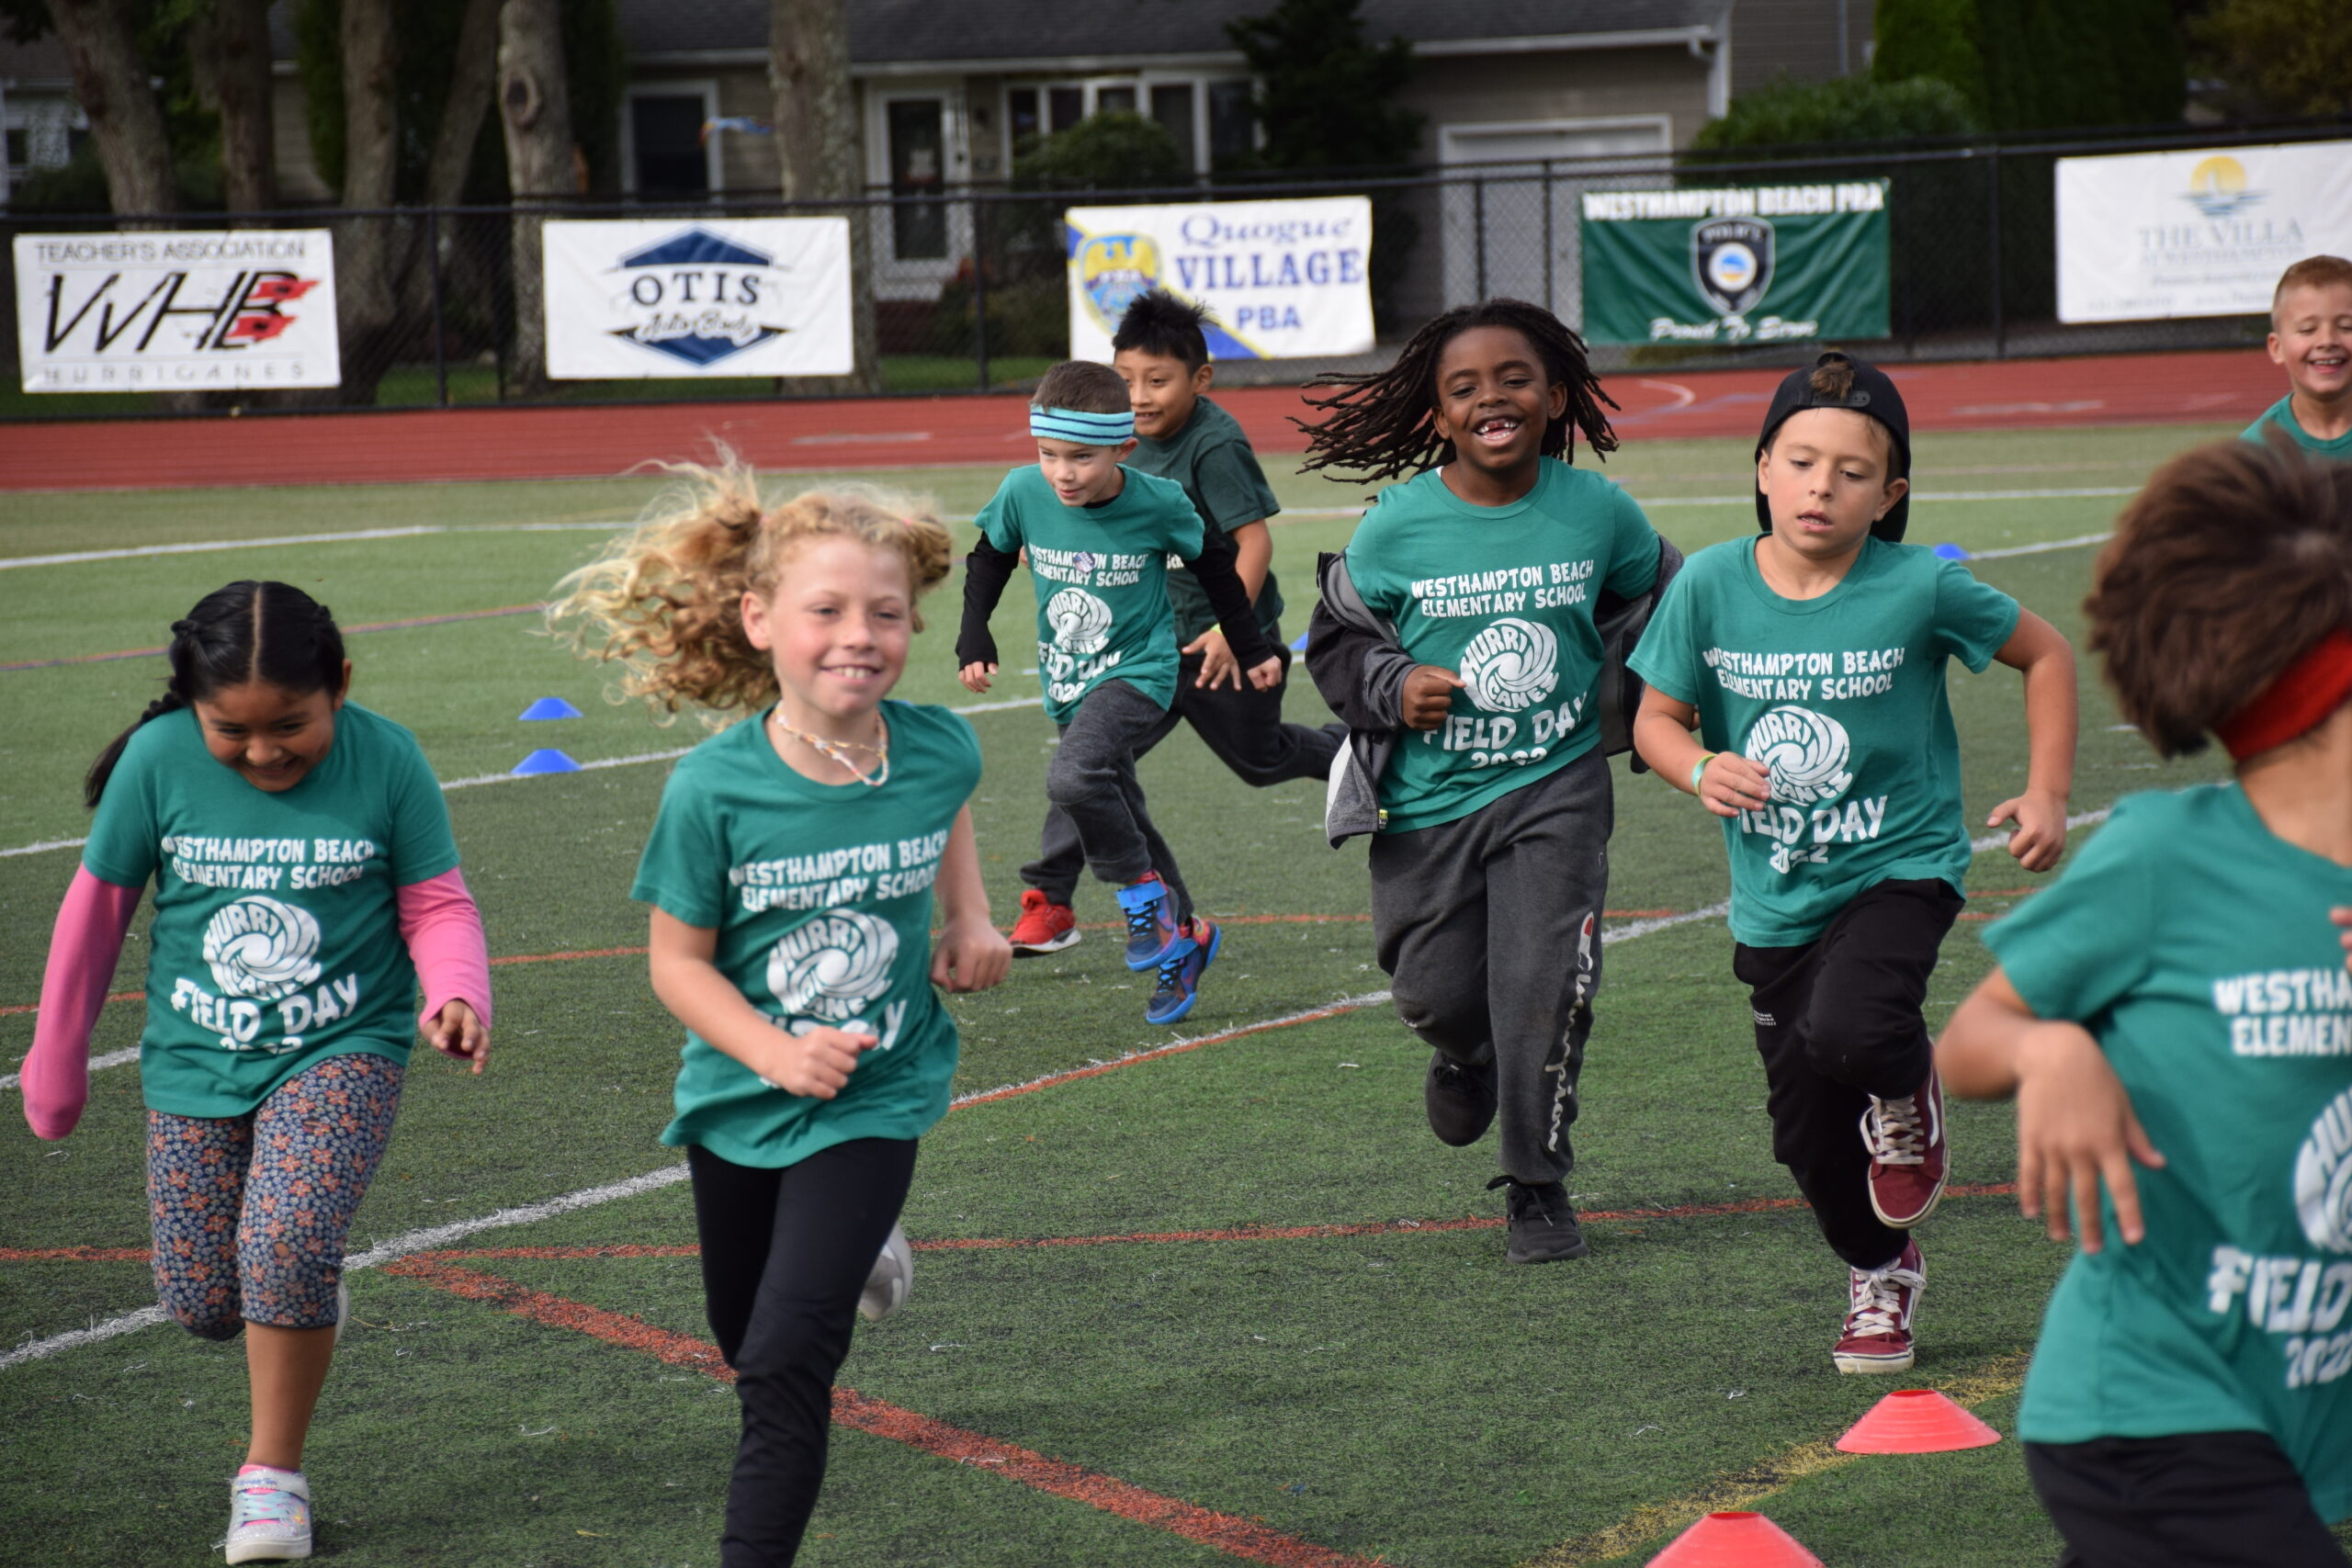 Westhampton Beach Elementary School students raised more than $20,000 for their school through their annual Hurricane Fun Run on September 30. As part of the PTA-sponsored event, students gathered pledges to run laps on the high school football field. Leading up to the event, they participated in spirit days. All of the funds raised will go directly toward cultural and academic enrichment programs at the elementary school. COURTESY WESTHAMPTON BEACH SCHOOL DISTRICT